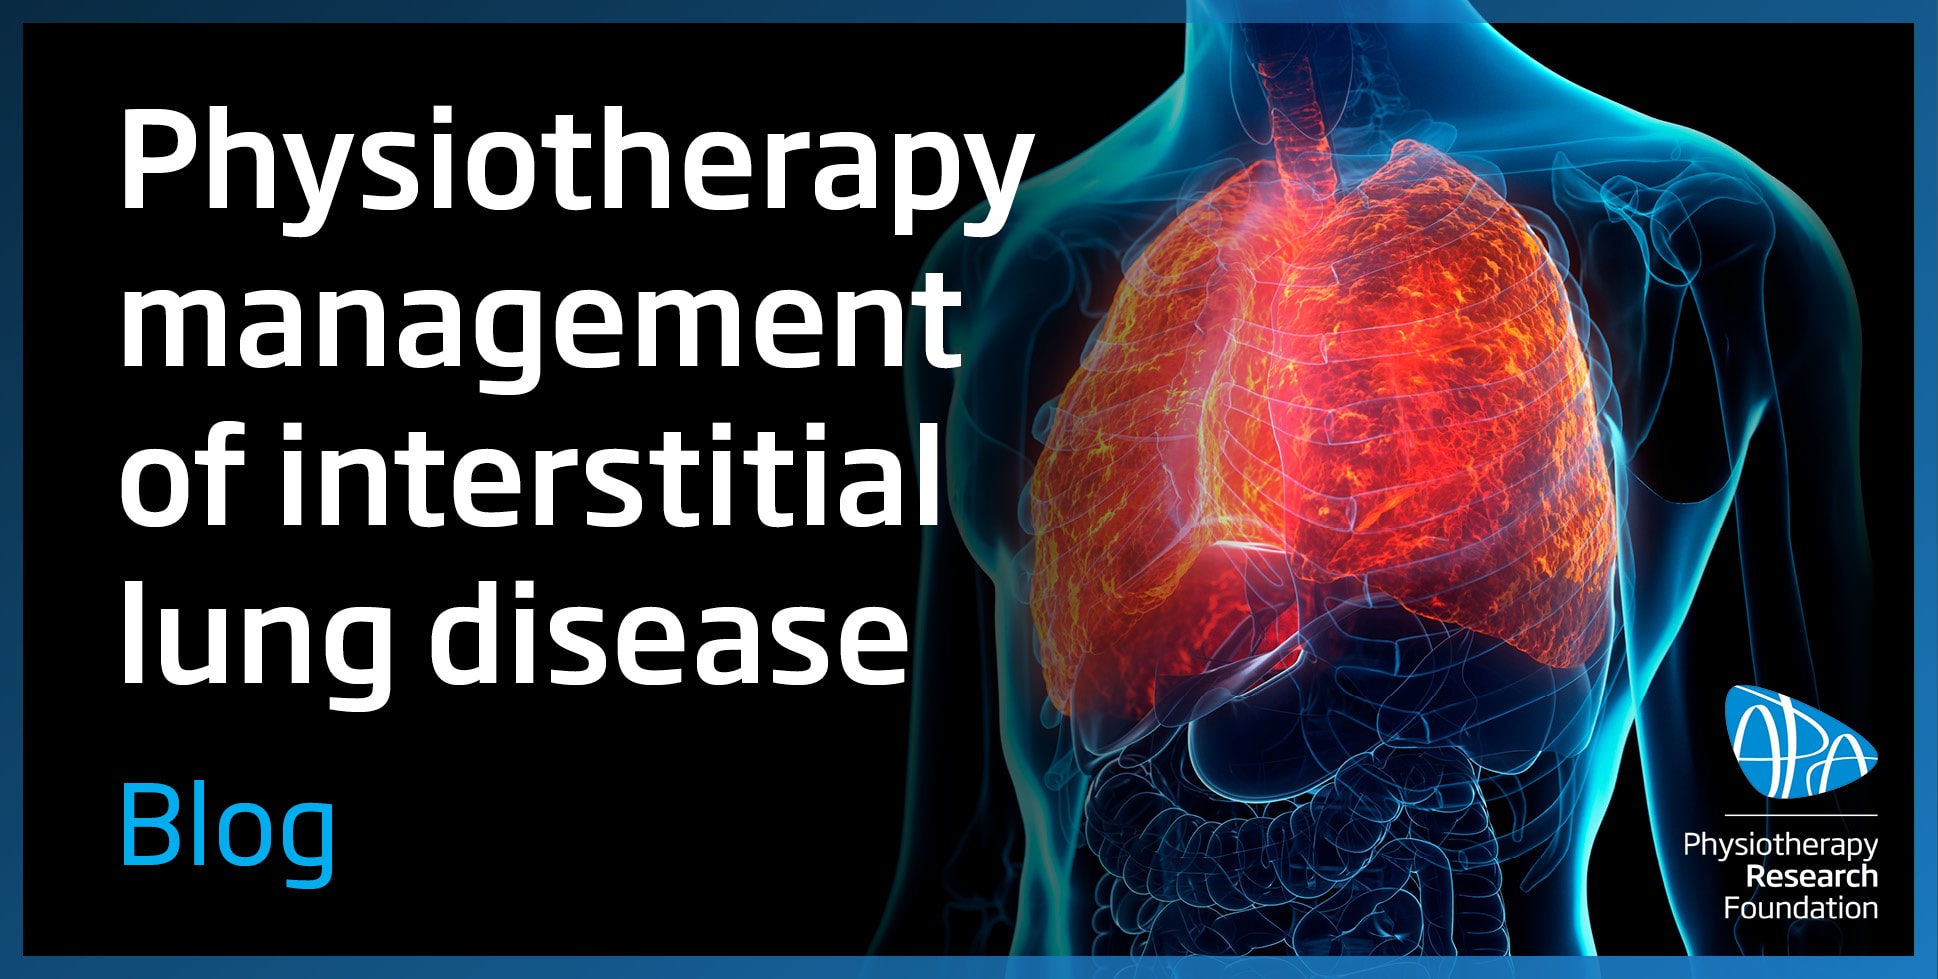 Physiotherapy management of interstitial lung disease